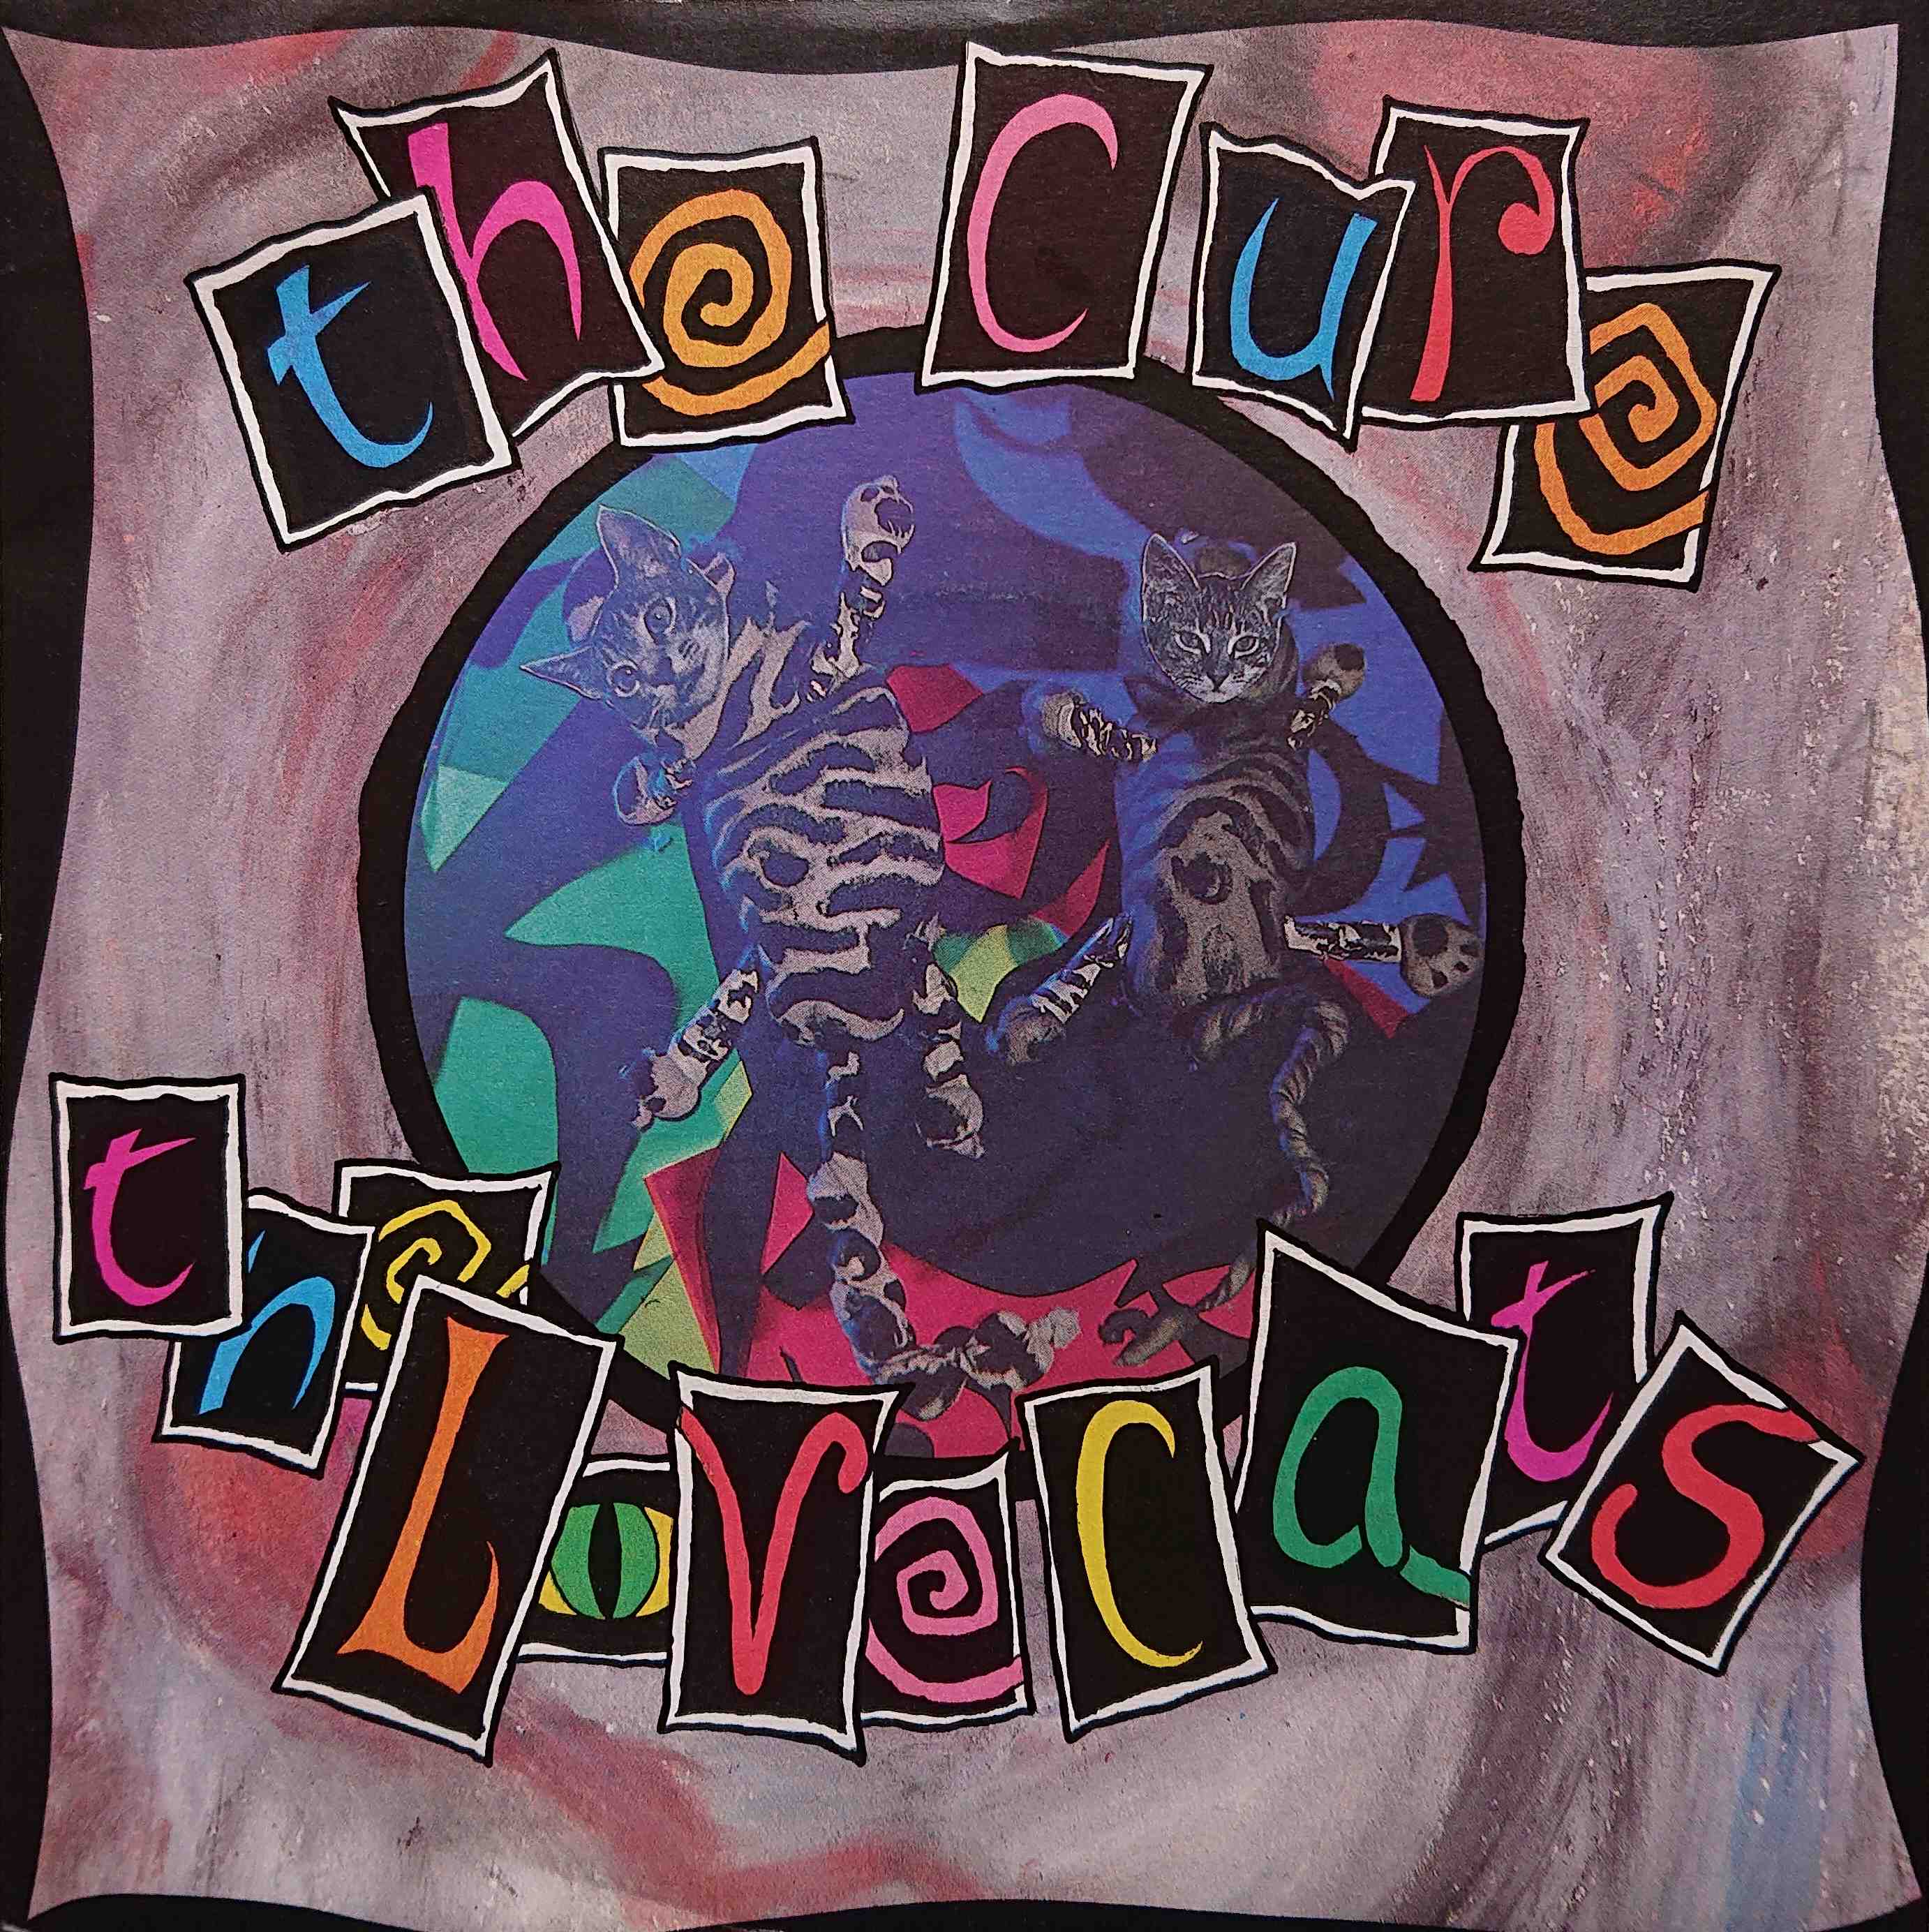 Picture of The love cats by artist The Cure 